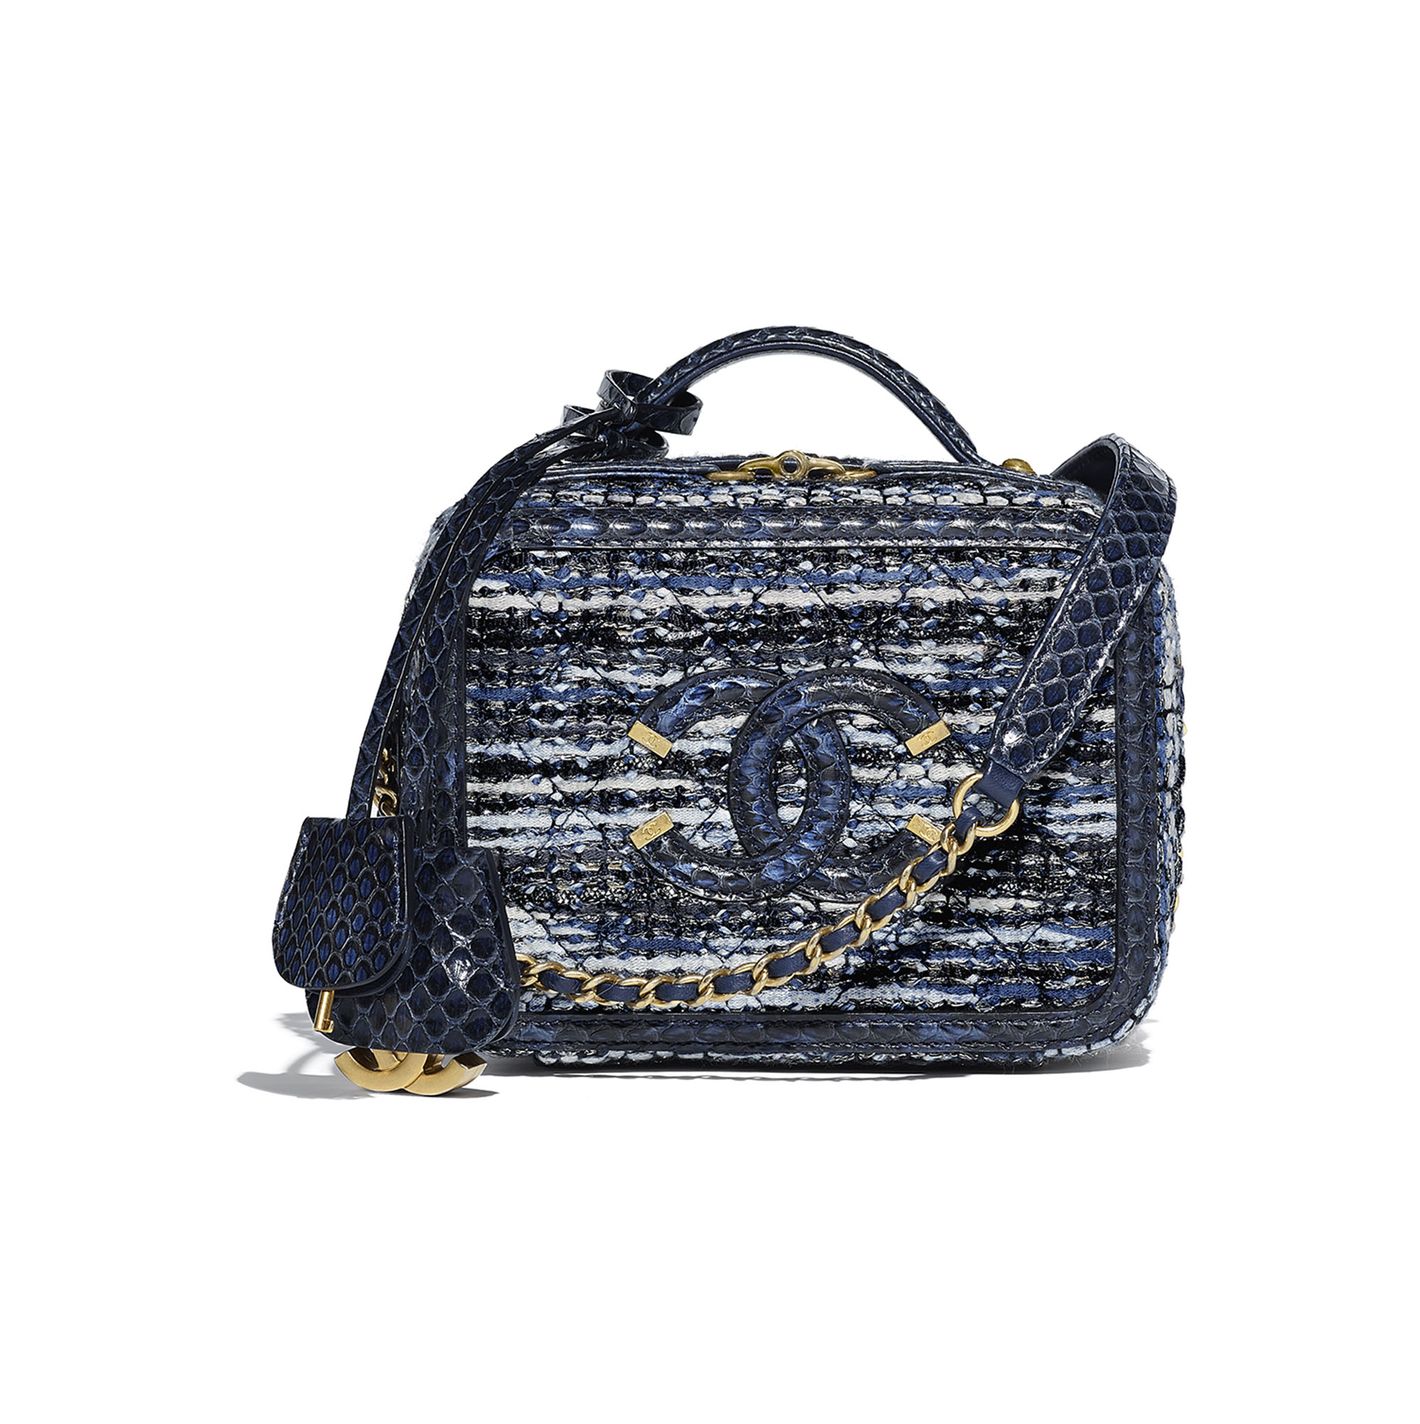 Chanel BLUE Handbag Collection : Overview, with Season/Year info. 